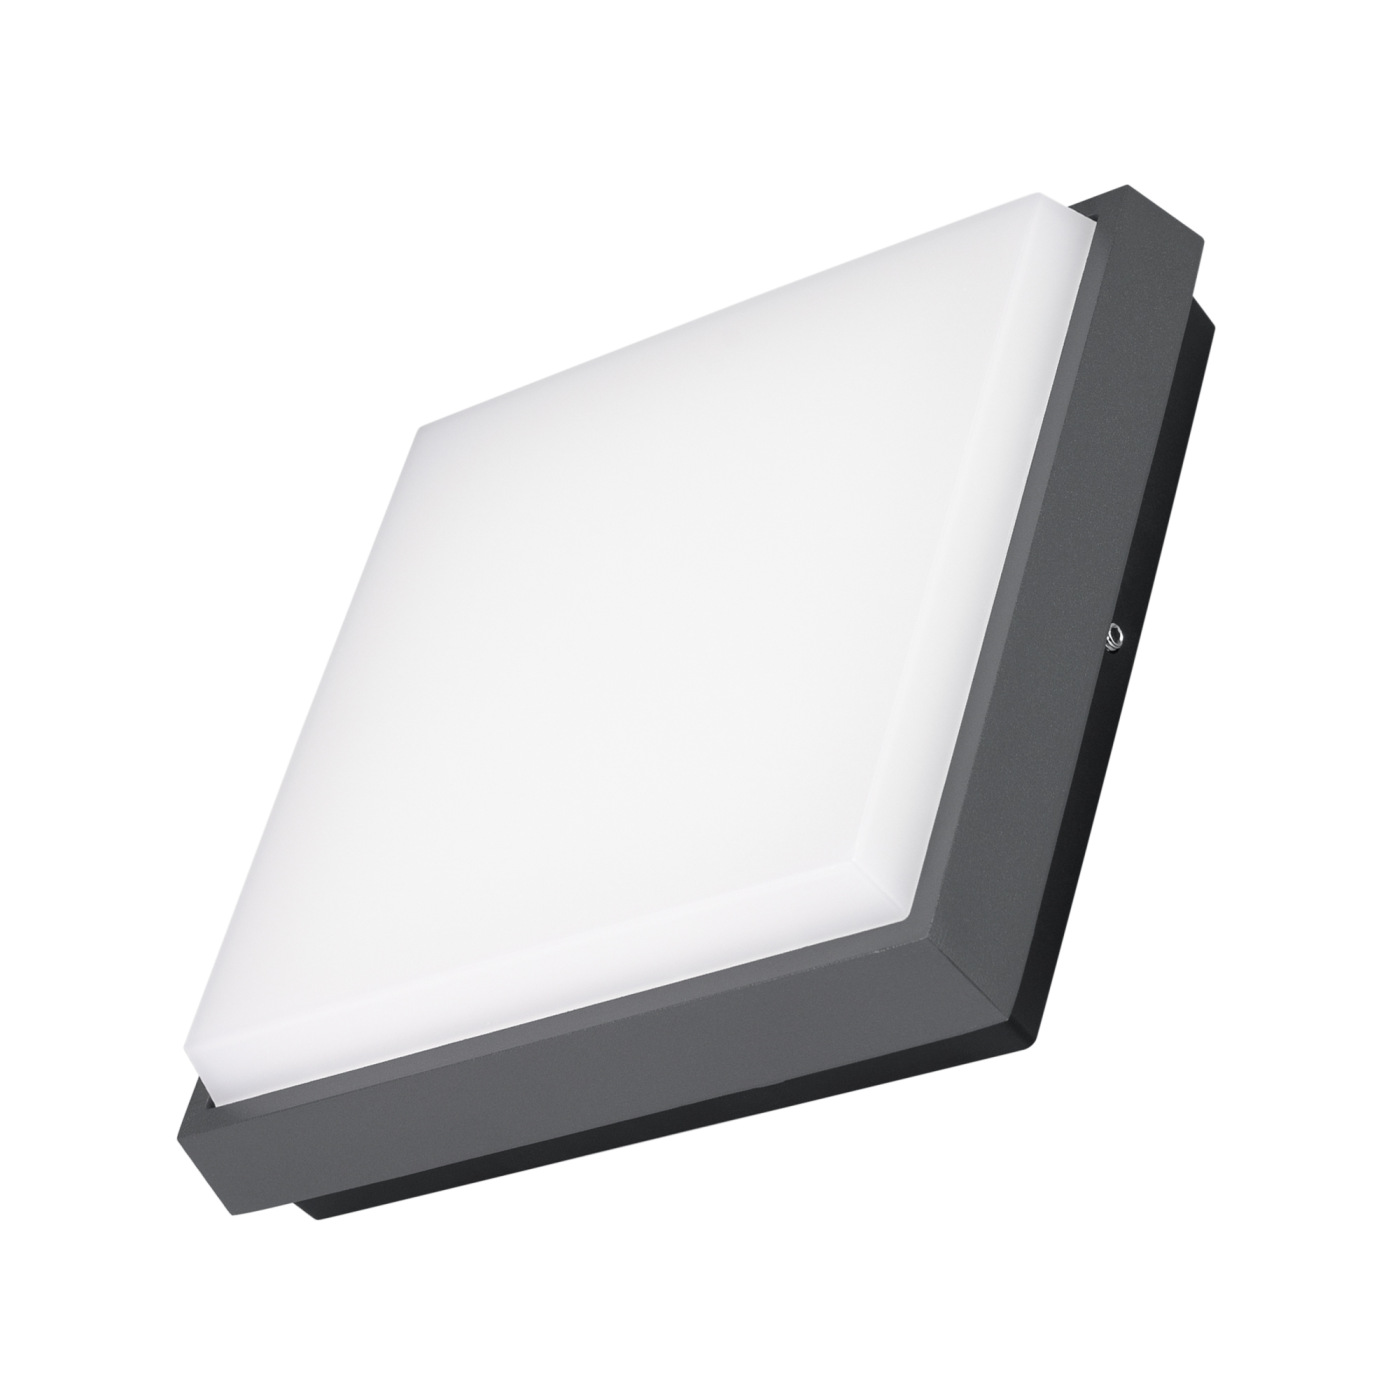 Светильник LGD-AREA-S175x175-10W Warm3000 (GR, 110 deg, 230V) (Arlight, IP54 Металл, 3 года) atomstack maker e85 frame for laser engraver up to 850x800mm engraving area